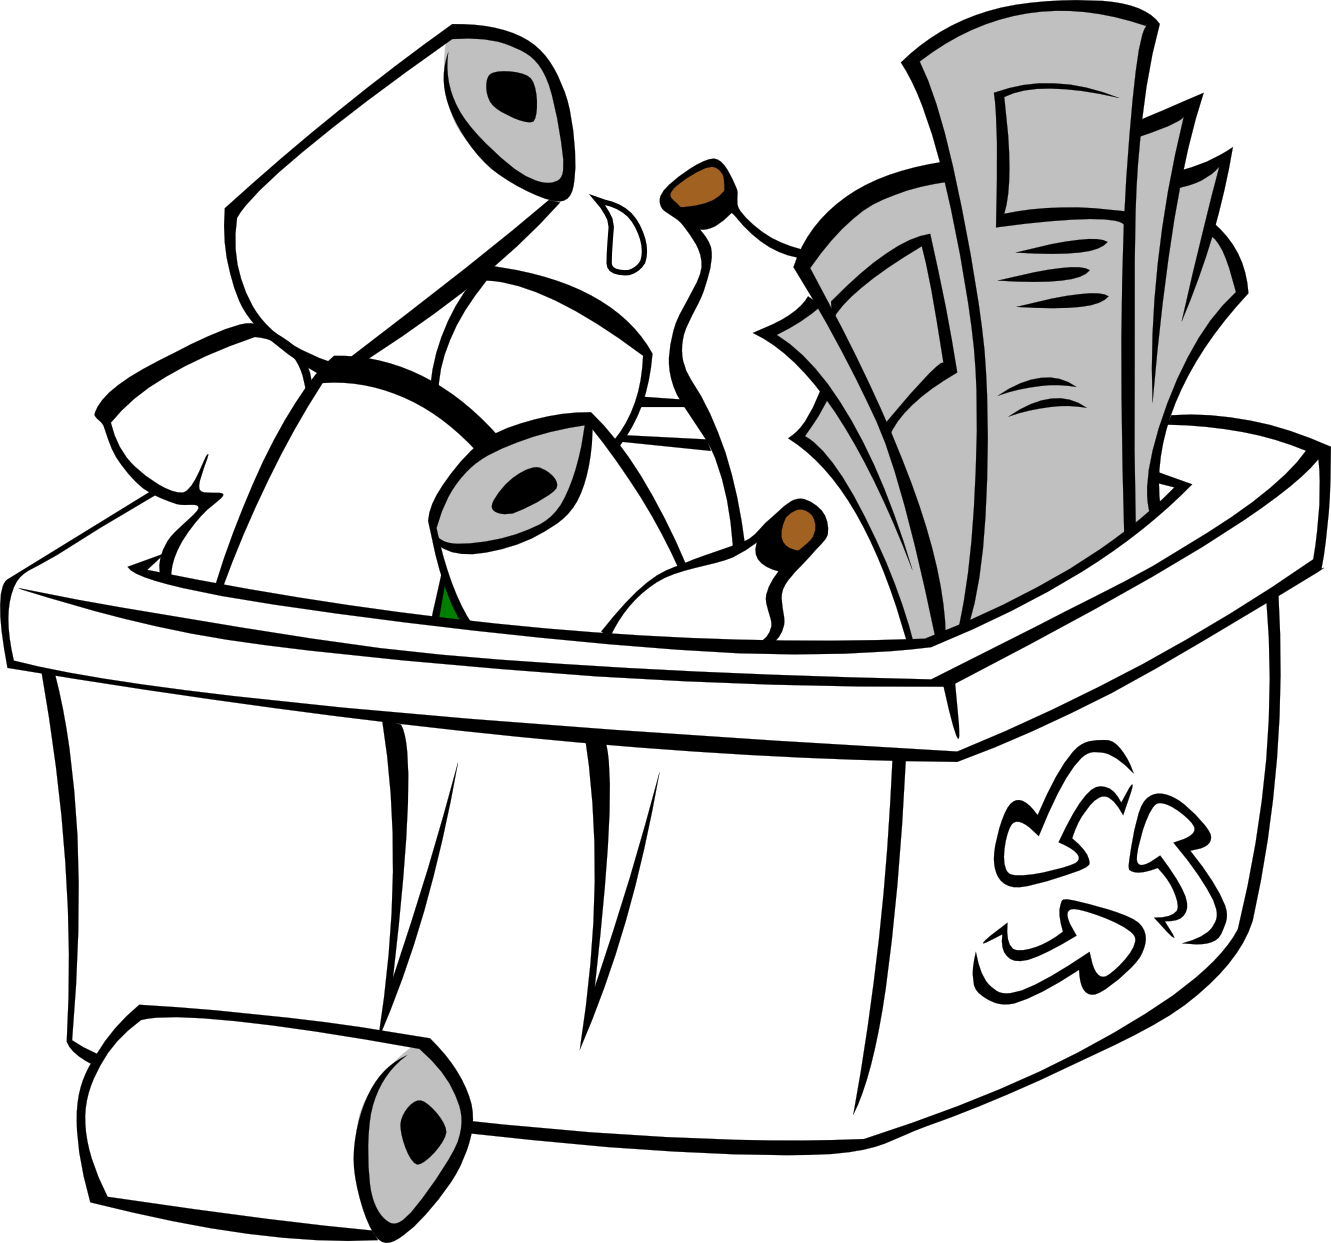 Recycle Clipart Black And White Free Images - Recycling Black And White (1331x1243)